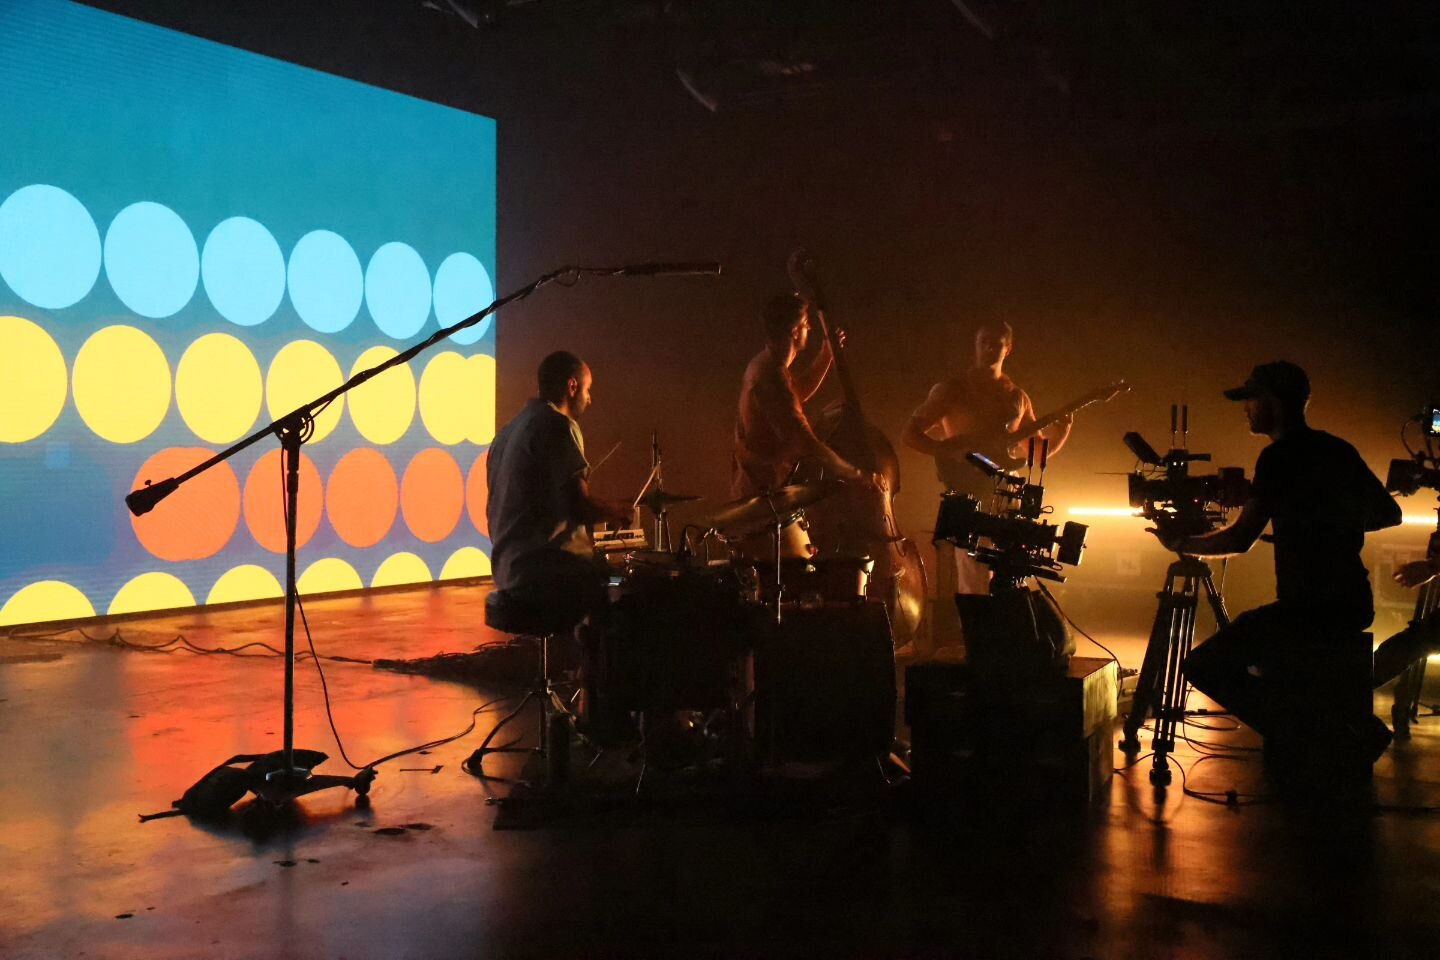 Vibes from the @dartcollective promotional shoot for their band, L&uacute;a, filmed at @nightlight.studios earlier this year.

About  L&uacute;a:  A  buoyant world inspired three piece,&nbsp;L&uacute;a&nbsp;references a wide range of the diaspora of 